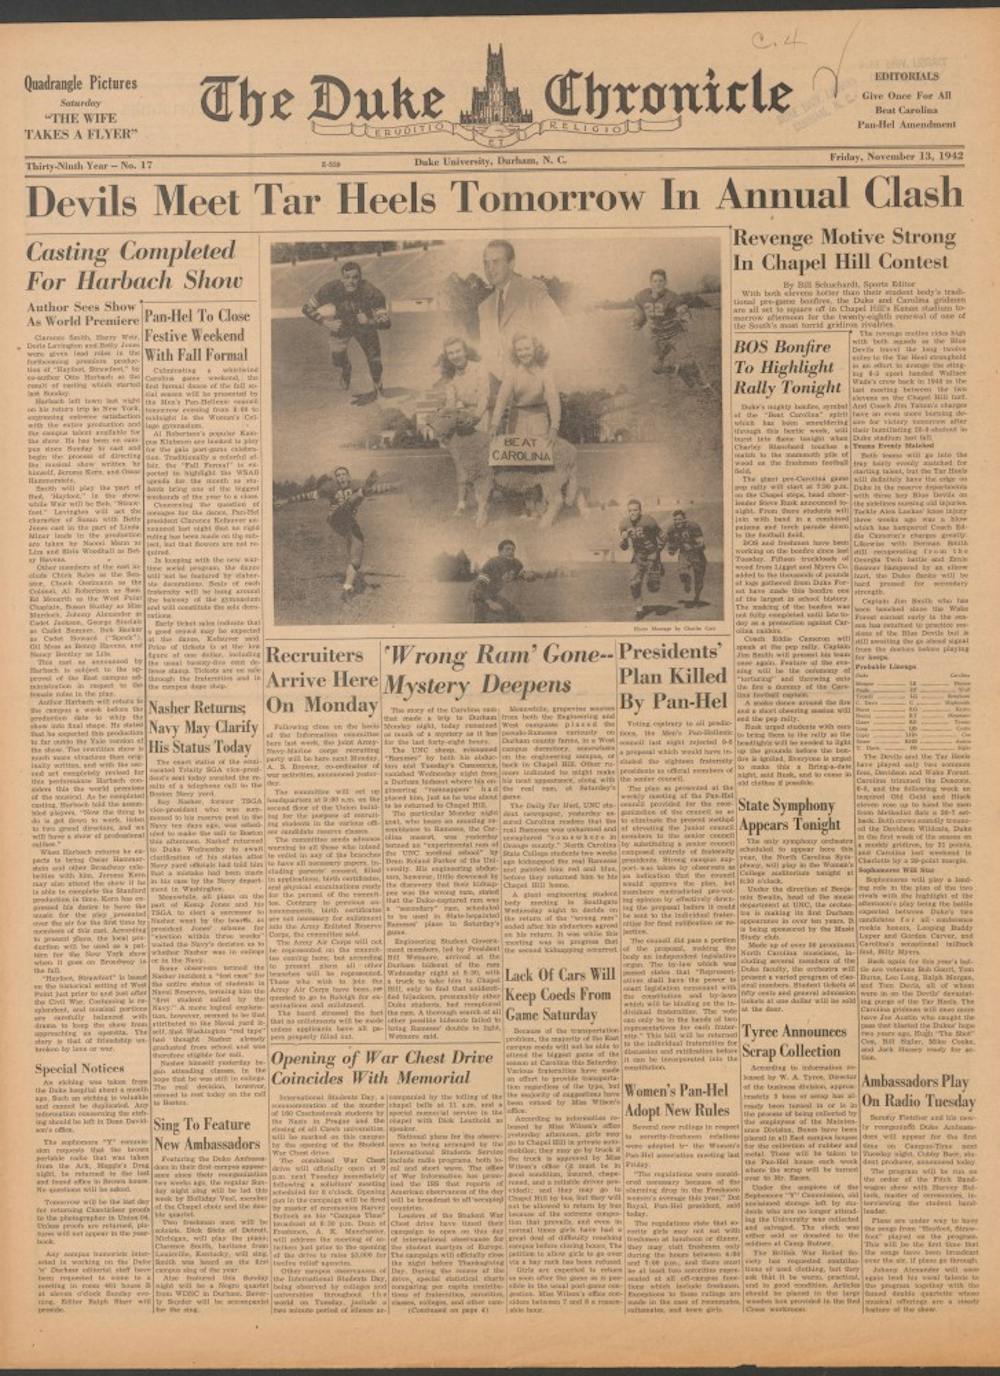 The animosity between Duke and North Carolina extended beyond the gridiron in 1942.